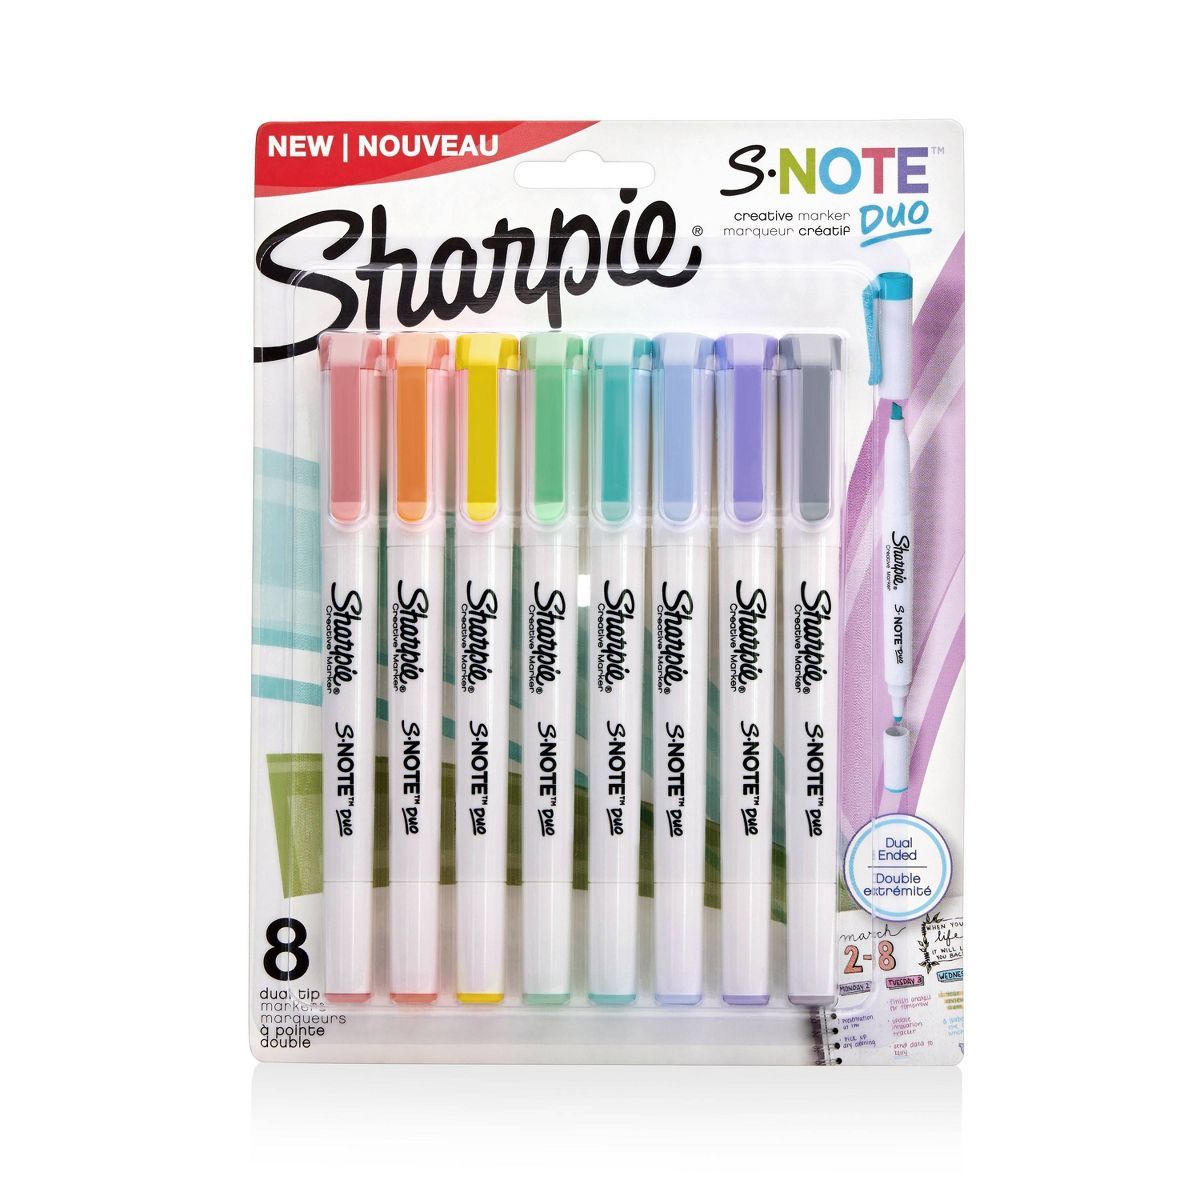 Sharpie S-Note 8pk Dual Tip Creative Highlighters Assorted Colors | Target